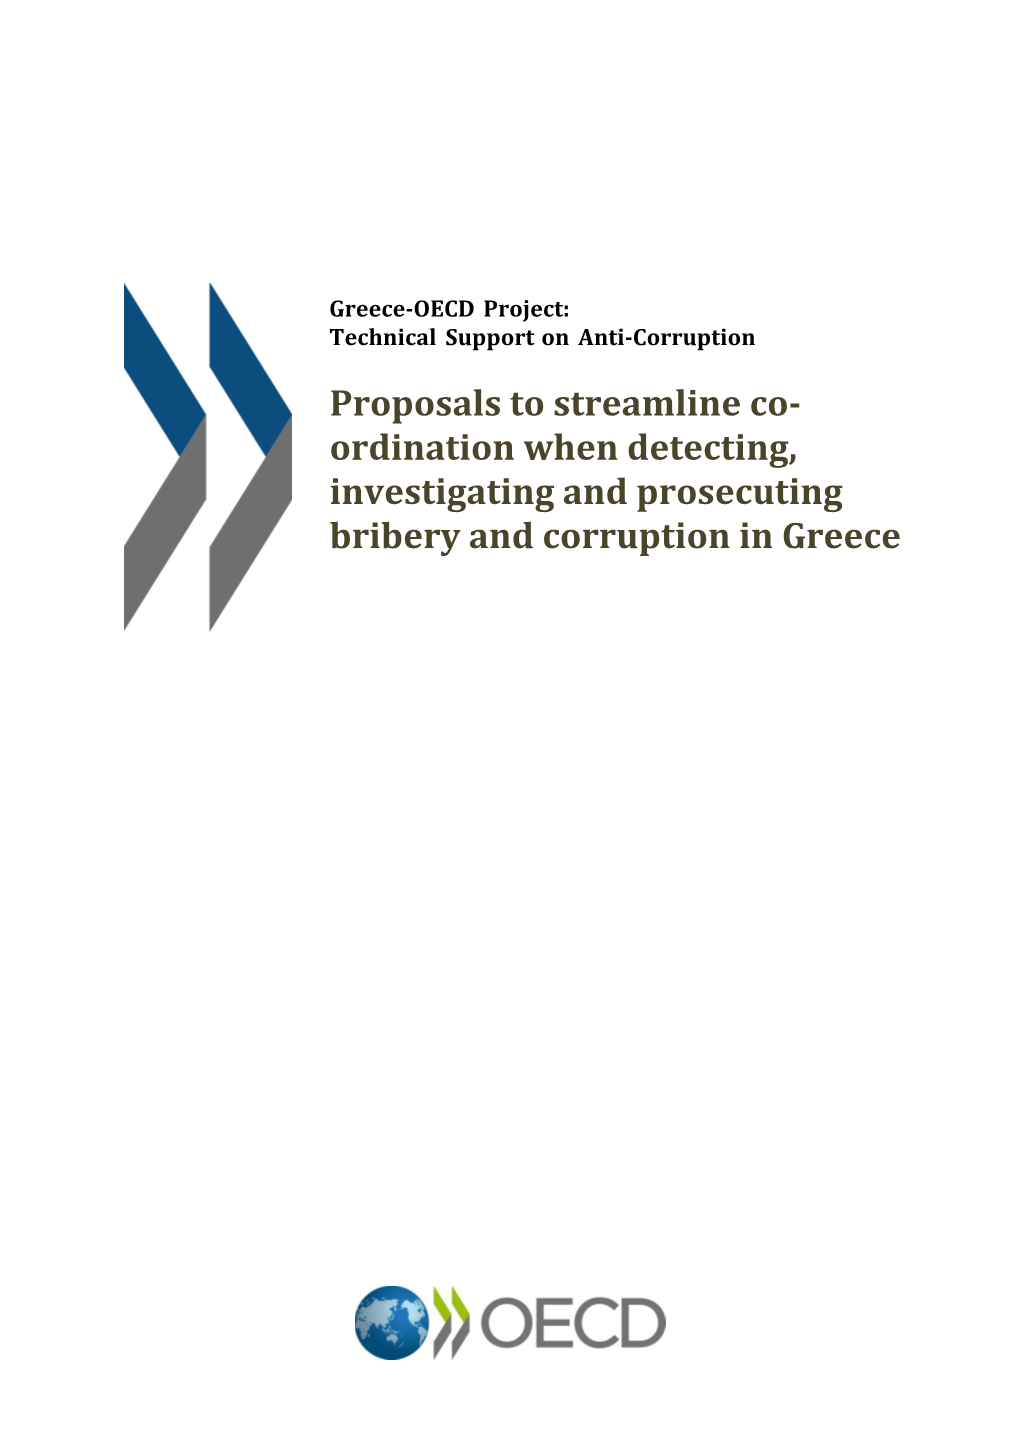 Proposals to Streamline Co- Ordination When Detecting, Investigating and Prosecuting Bribery and Corruption in Greece